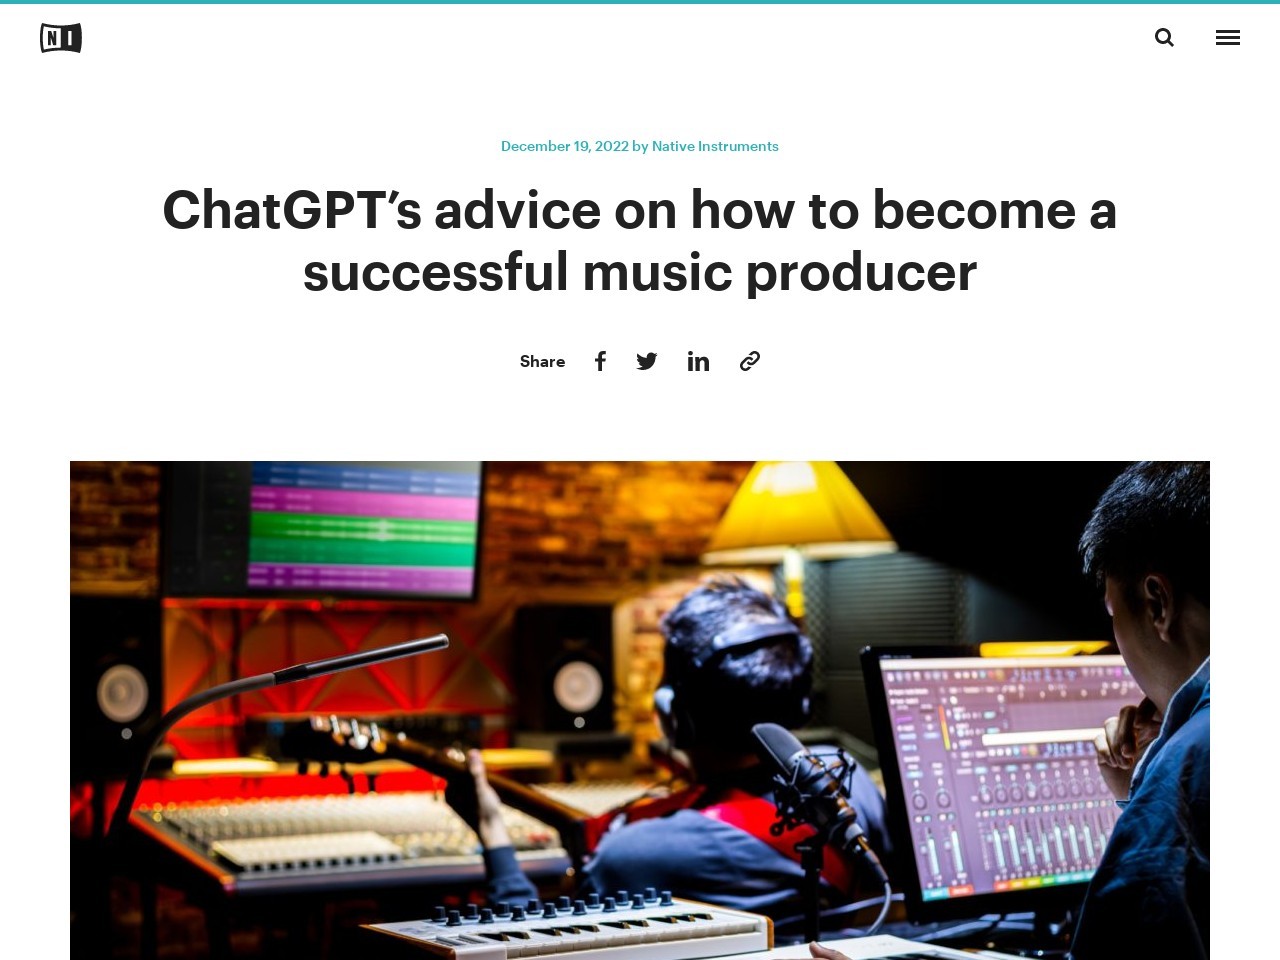 ChatGPT’s advice on how to become a successful music producer | Native Instruments Blog